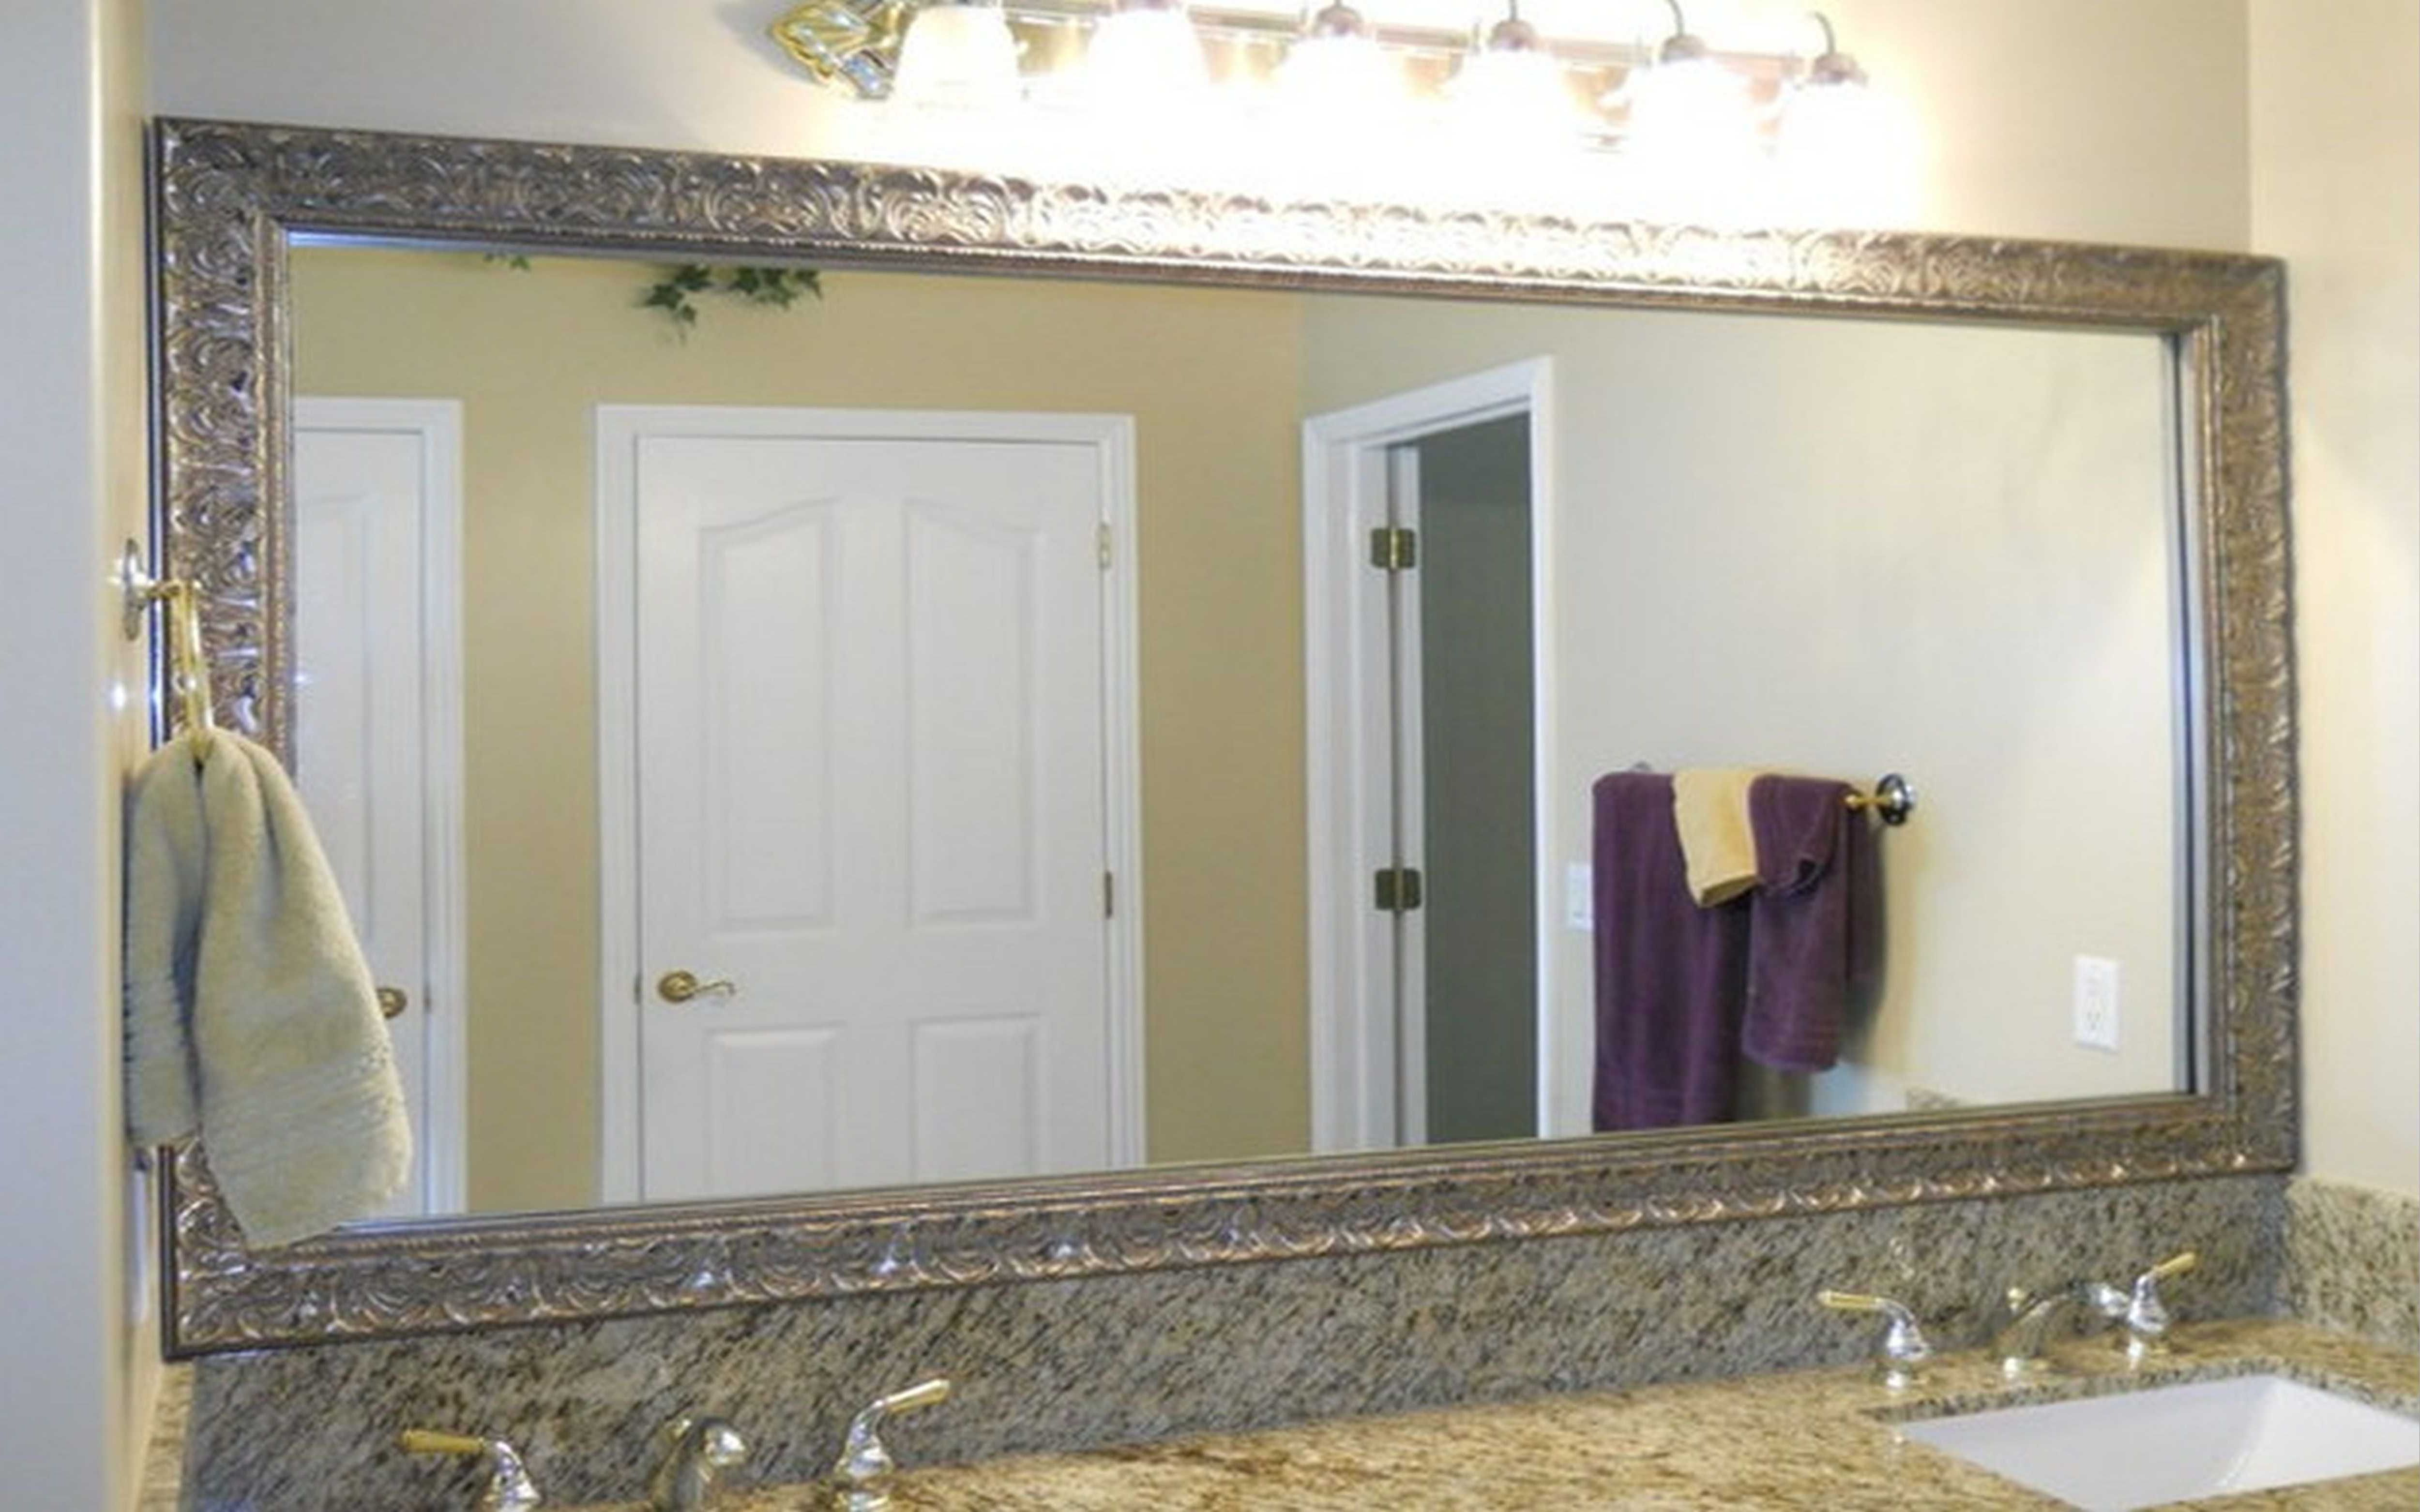 Brushed Nickel Wall Mirrors For Bathroom Within 2019 34 Most Magic Extraordinary How To Hang Bathroom Mirror About (View 7 of 20)